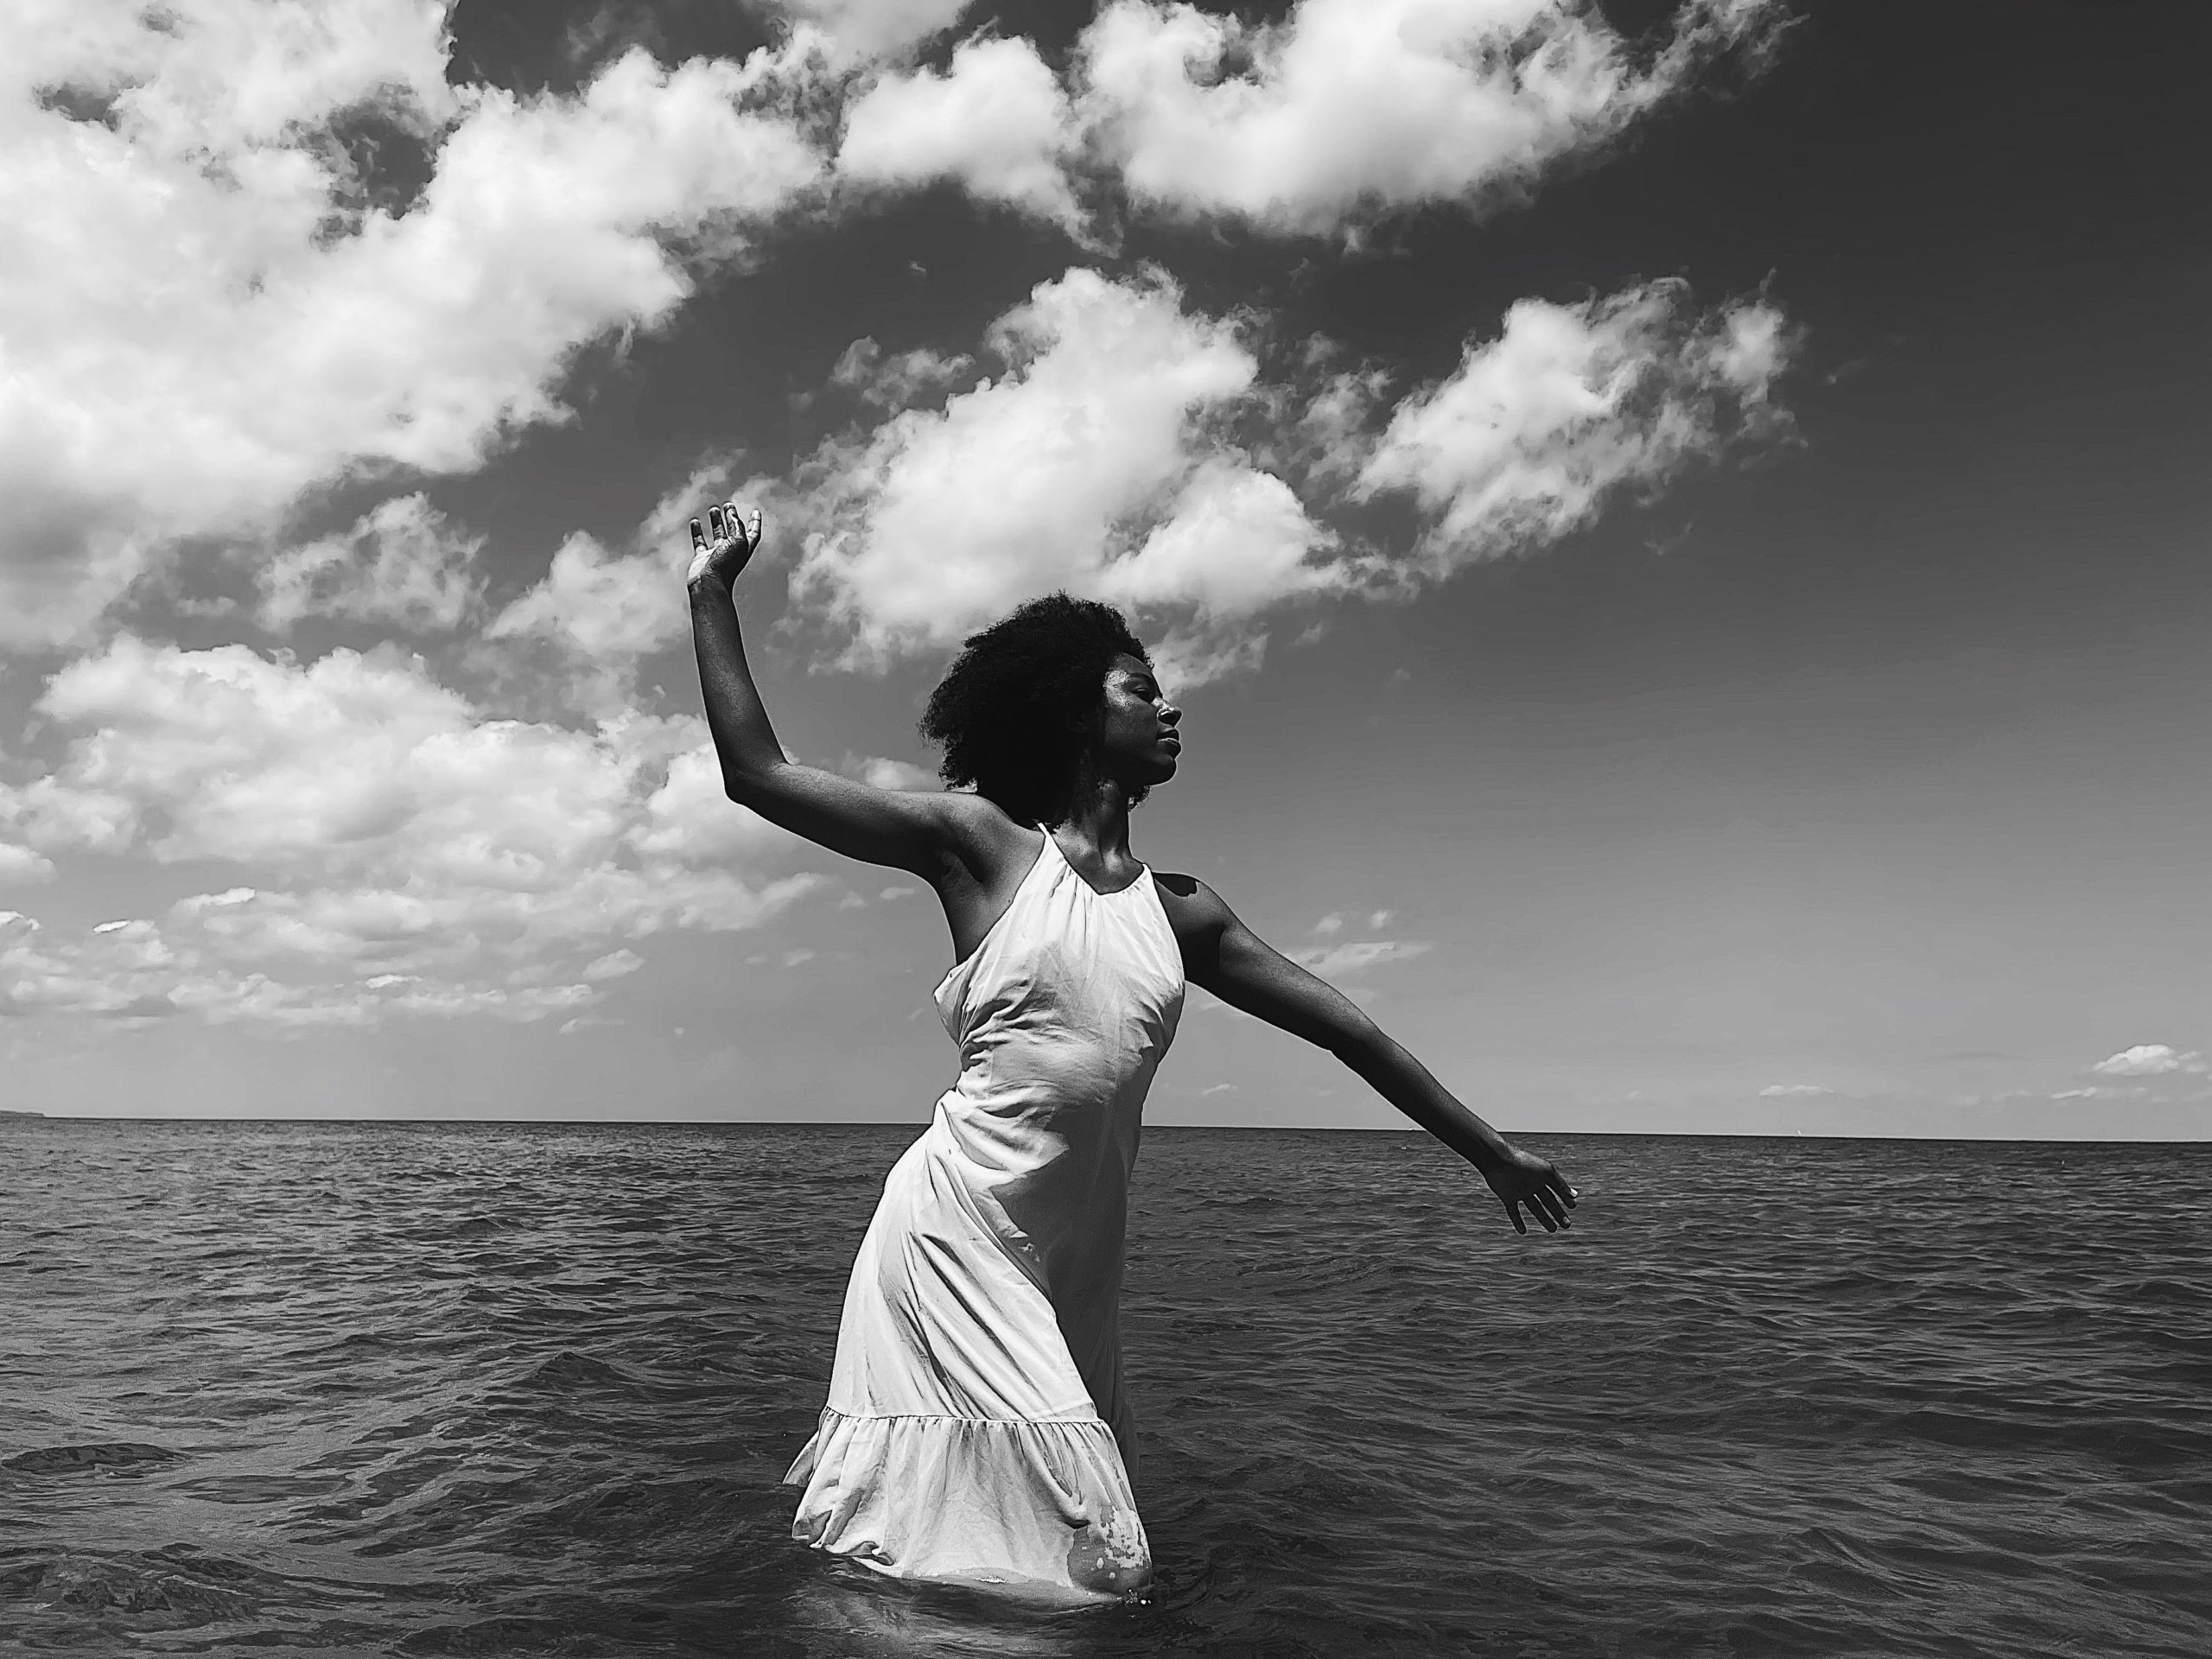 A black and white image of a medium dark skin tone person standing in the ocean. Their right arm is reaching back and up towards the cloud filled sky, their left arm reaches down and out towards the water. Their eyes are closed serenly.